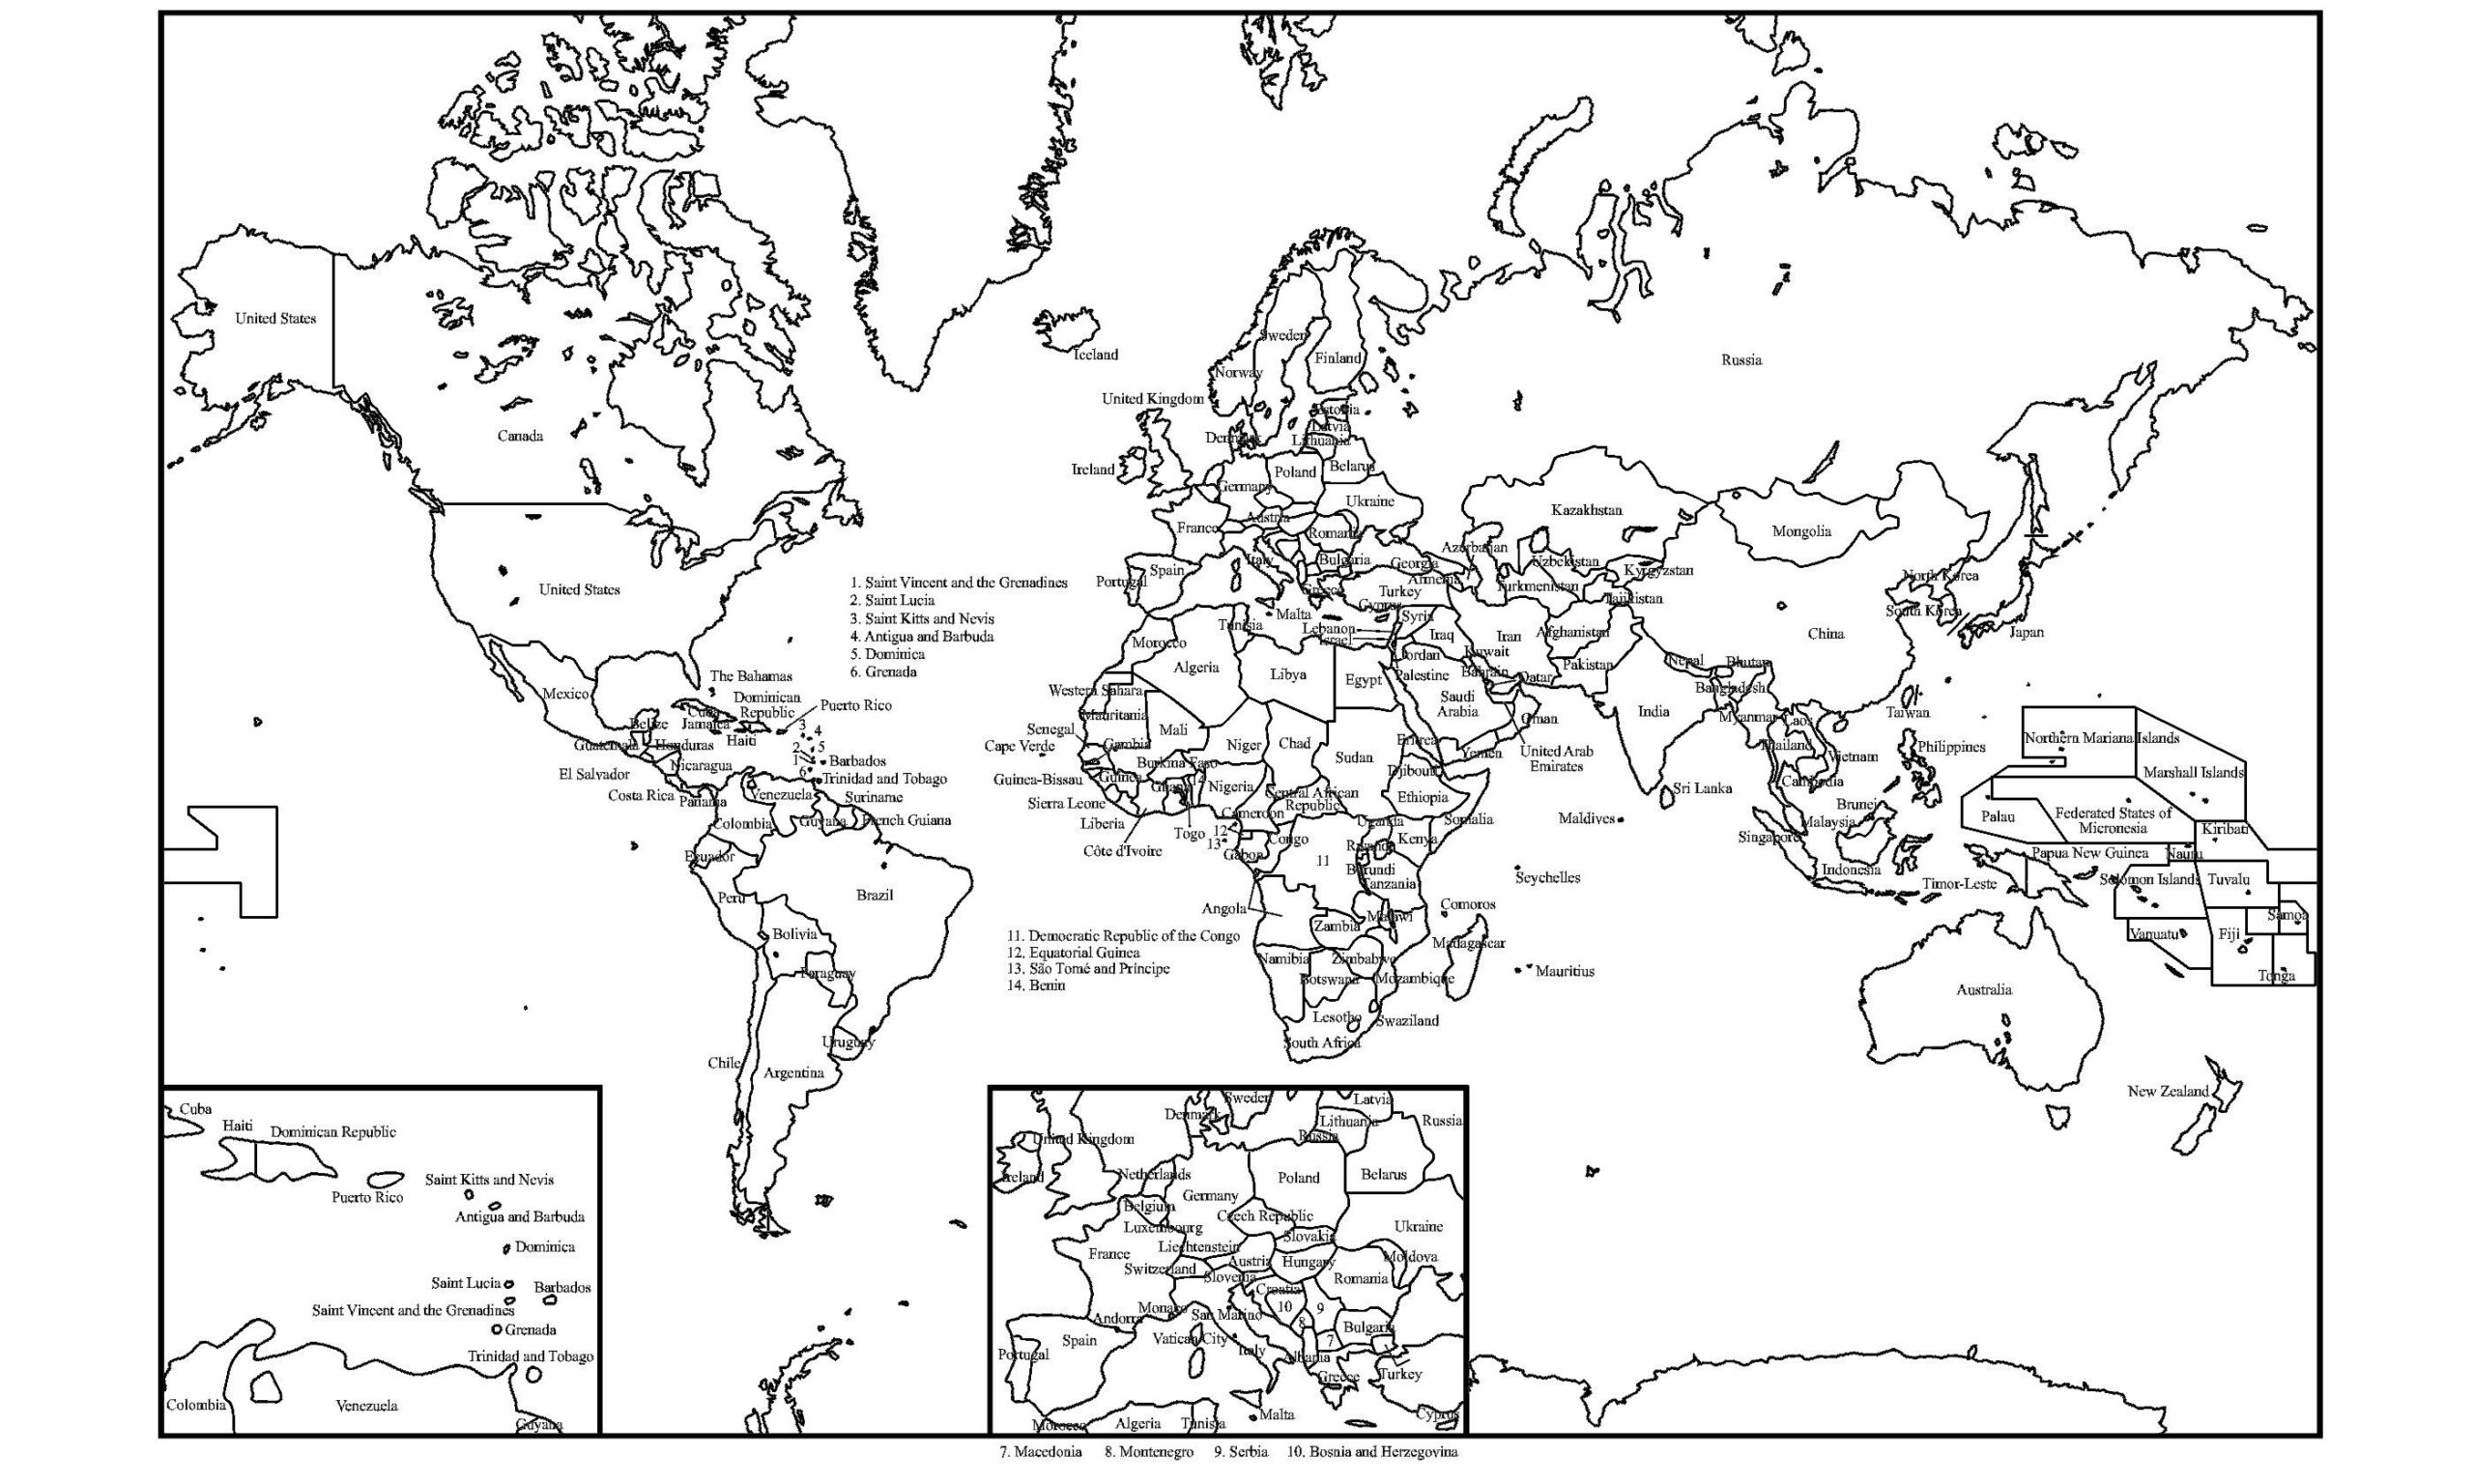 Black And White World Map With Continents Labeled Best Of Printable 